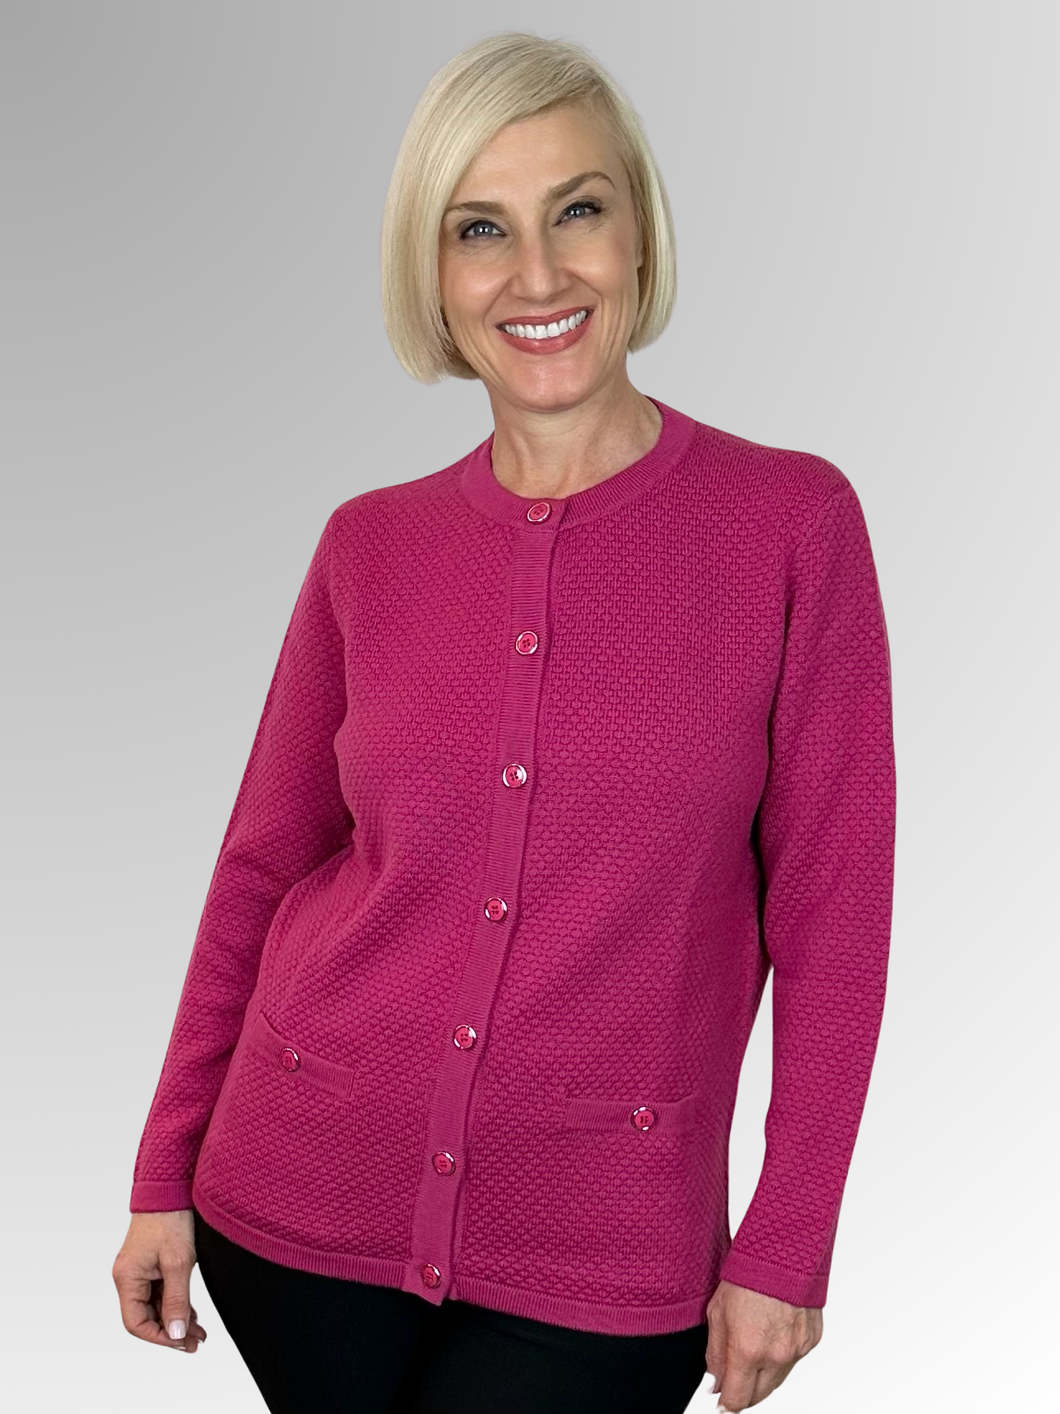 With over 70 years of experience in designing and crafting high-quality women's knitwear, Slade Knitwear is a renowned Australian brand. Made from 100% Pure Wool, their Magenta Bubble Stitch Cardigan, complete with two pockets, is a timeless and luxurious addition to any winter wardrobe. Trust in Slade for the best in winter fashion.